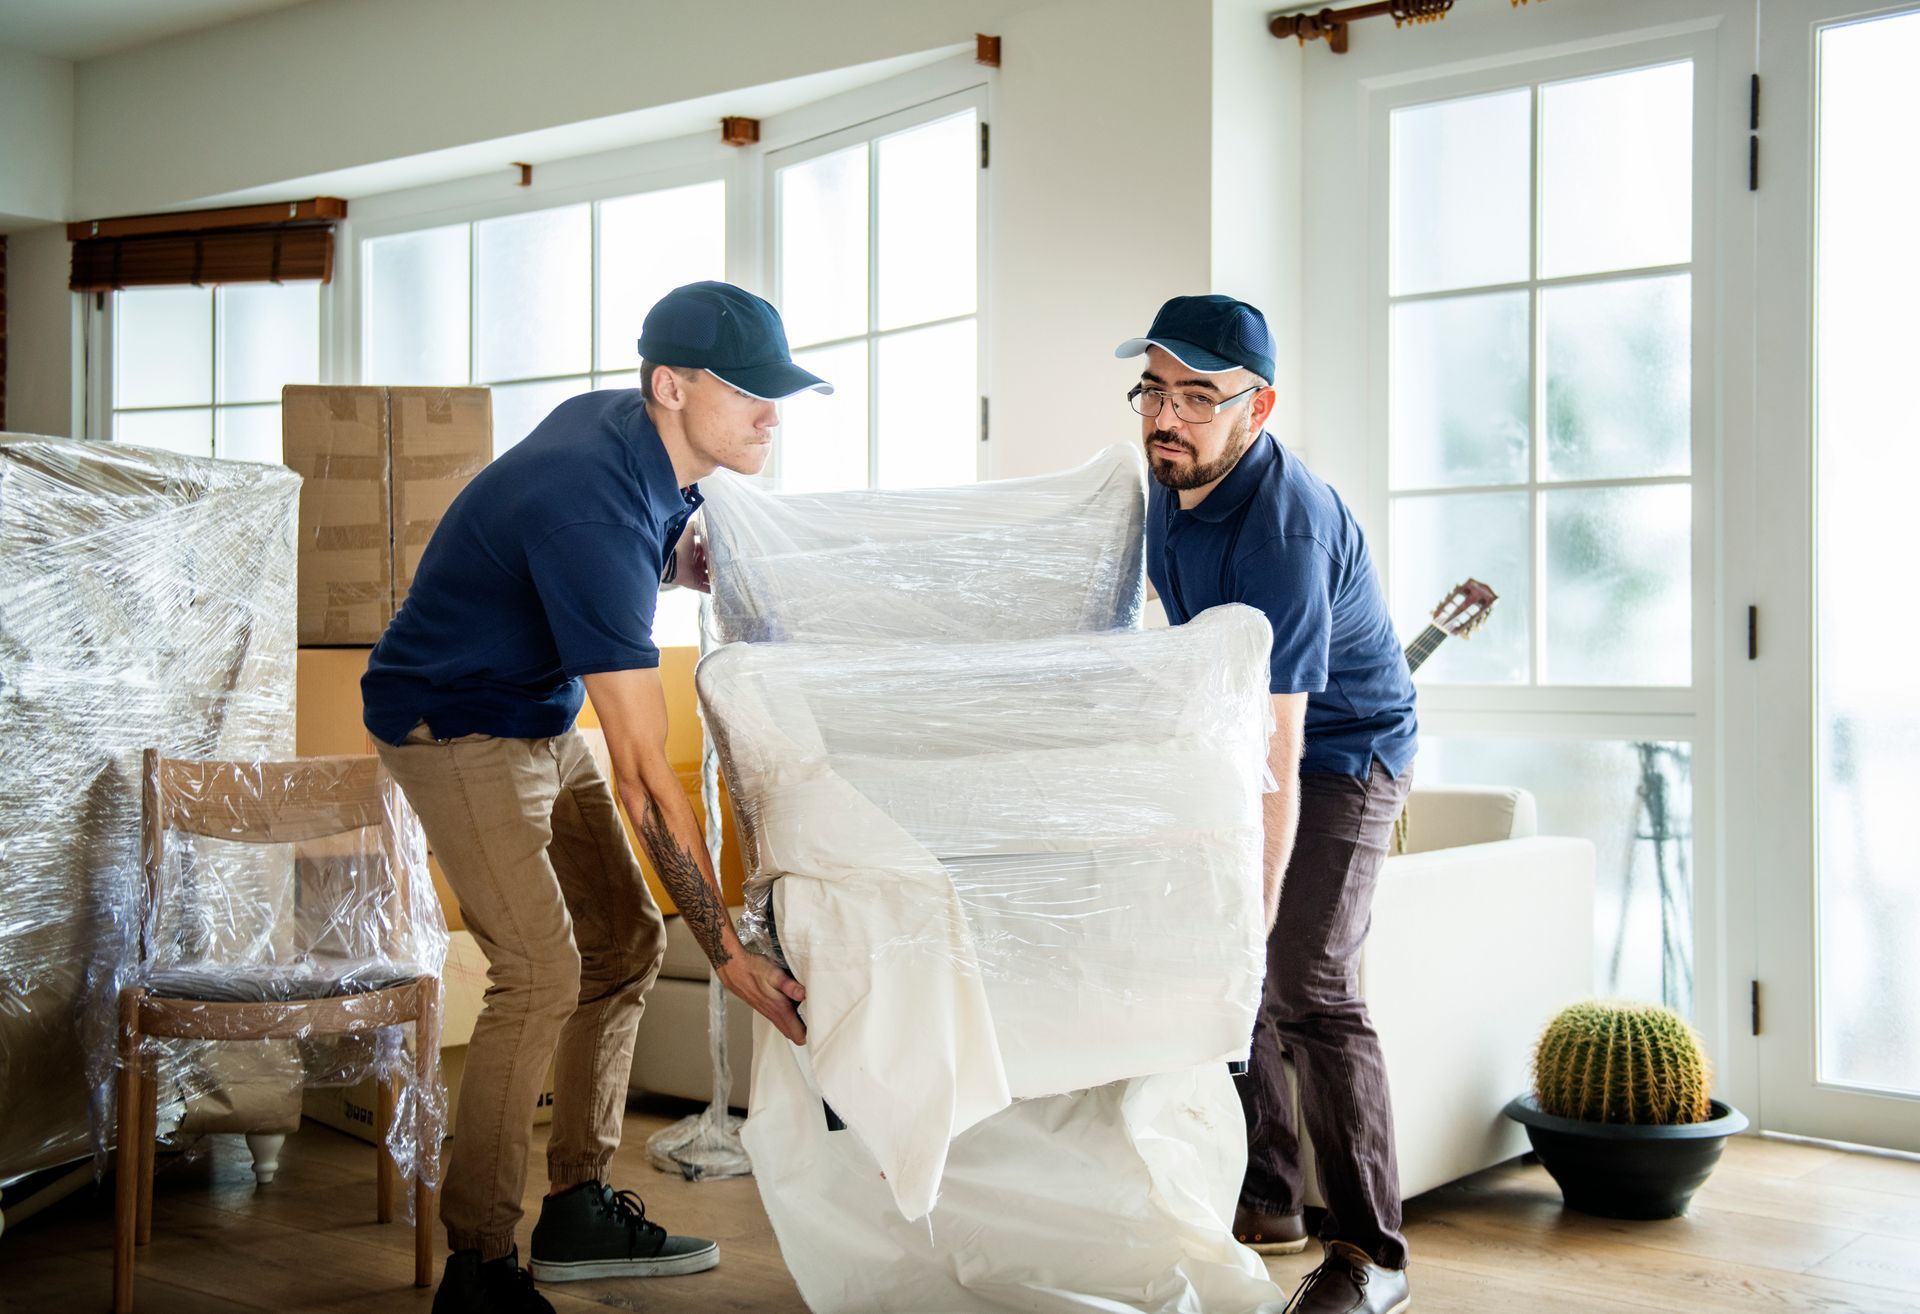 two men are carrying a couch wrapped in plastic in a living room .